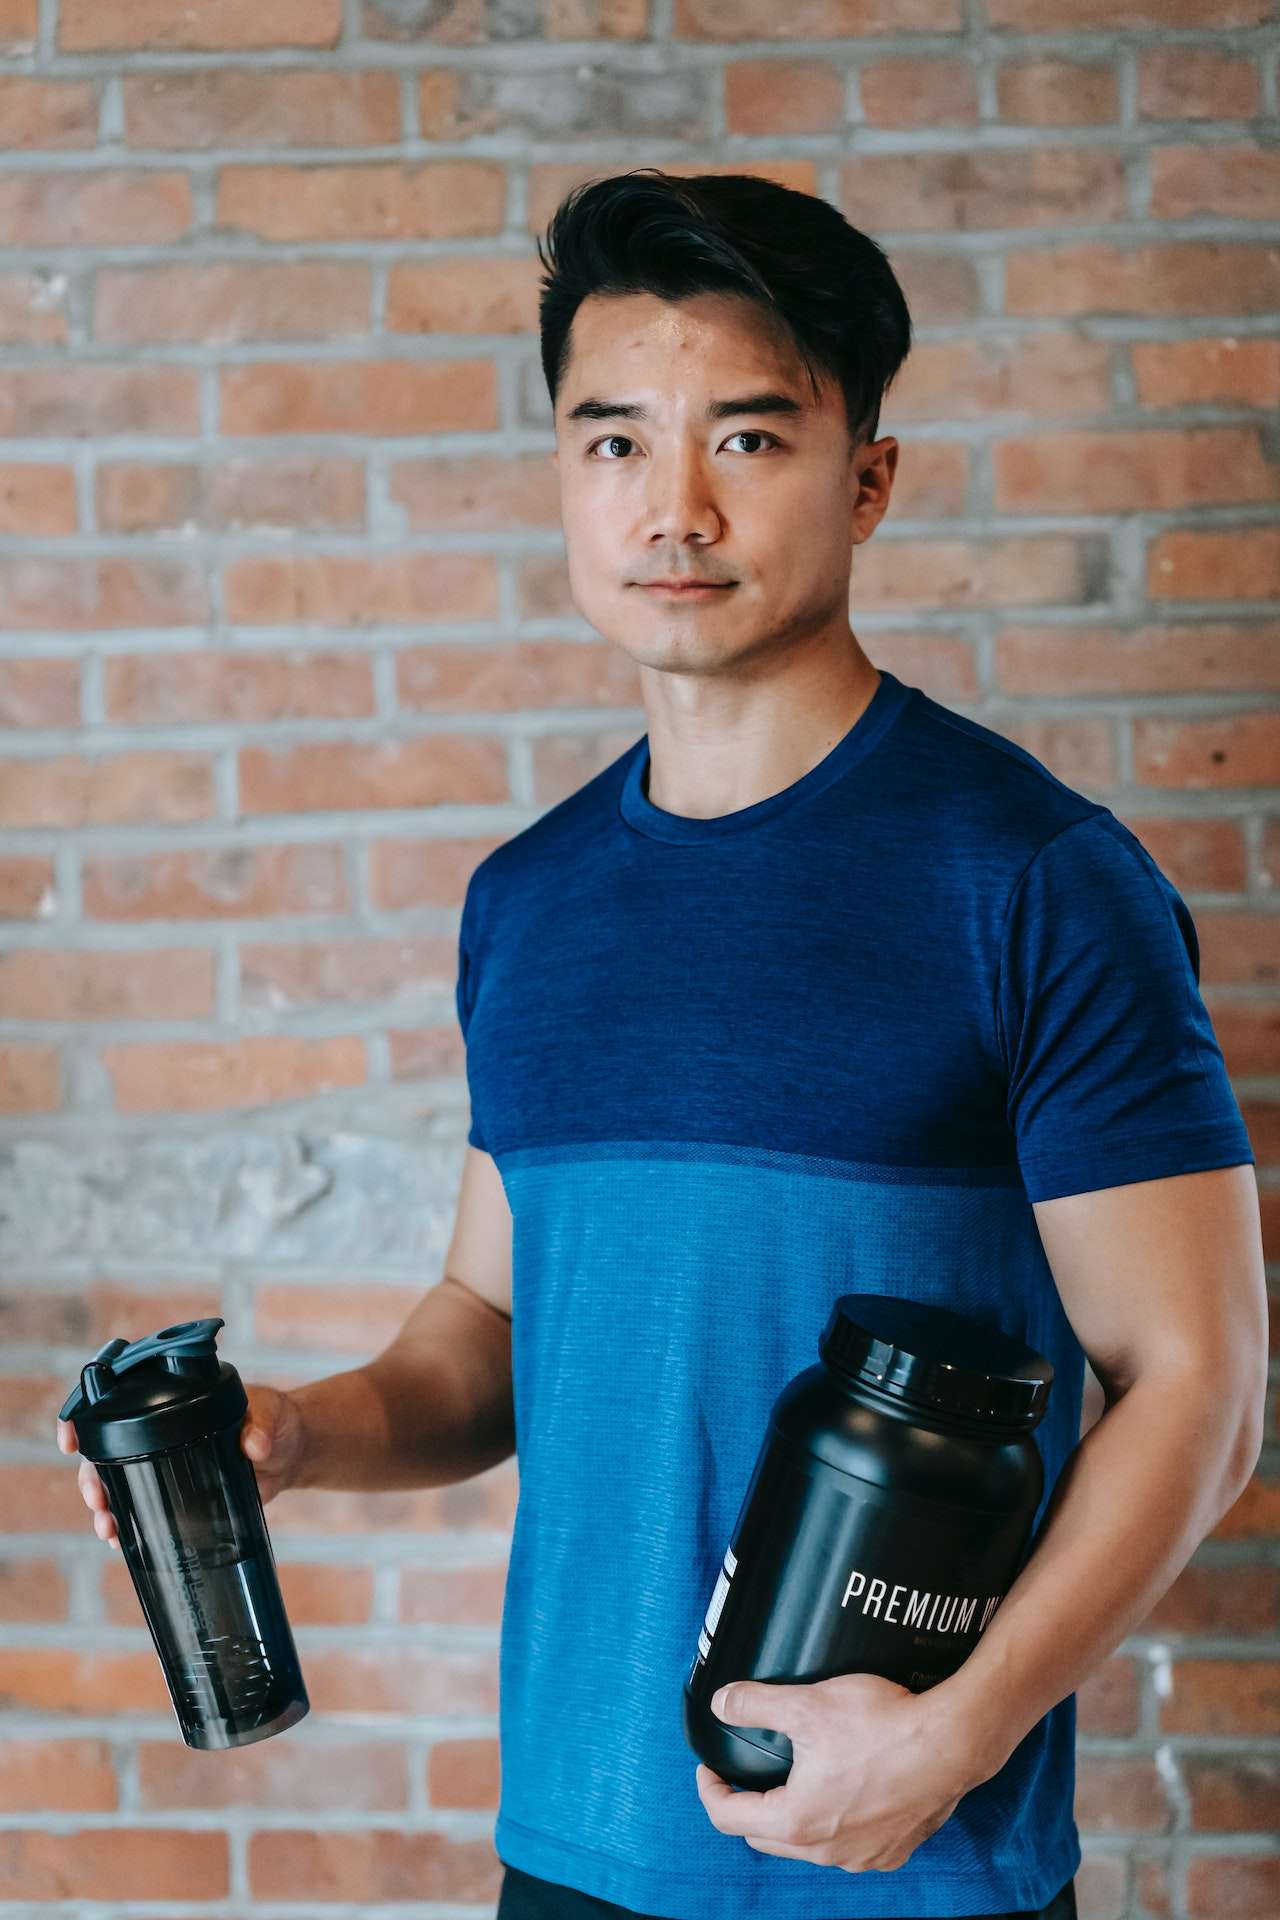 Ethnic sportsman standing with protein jar and water bottle 